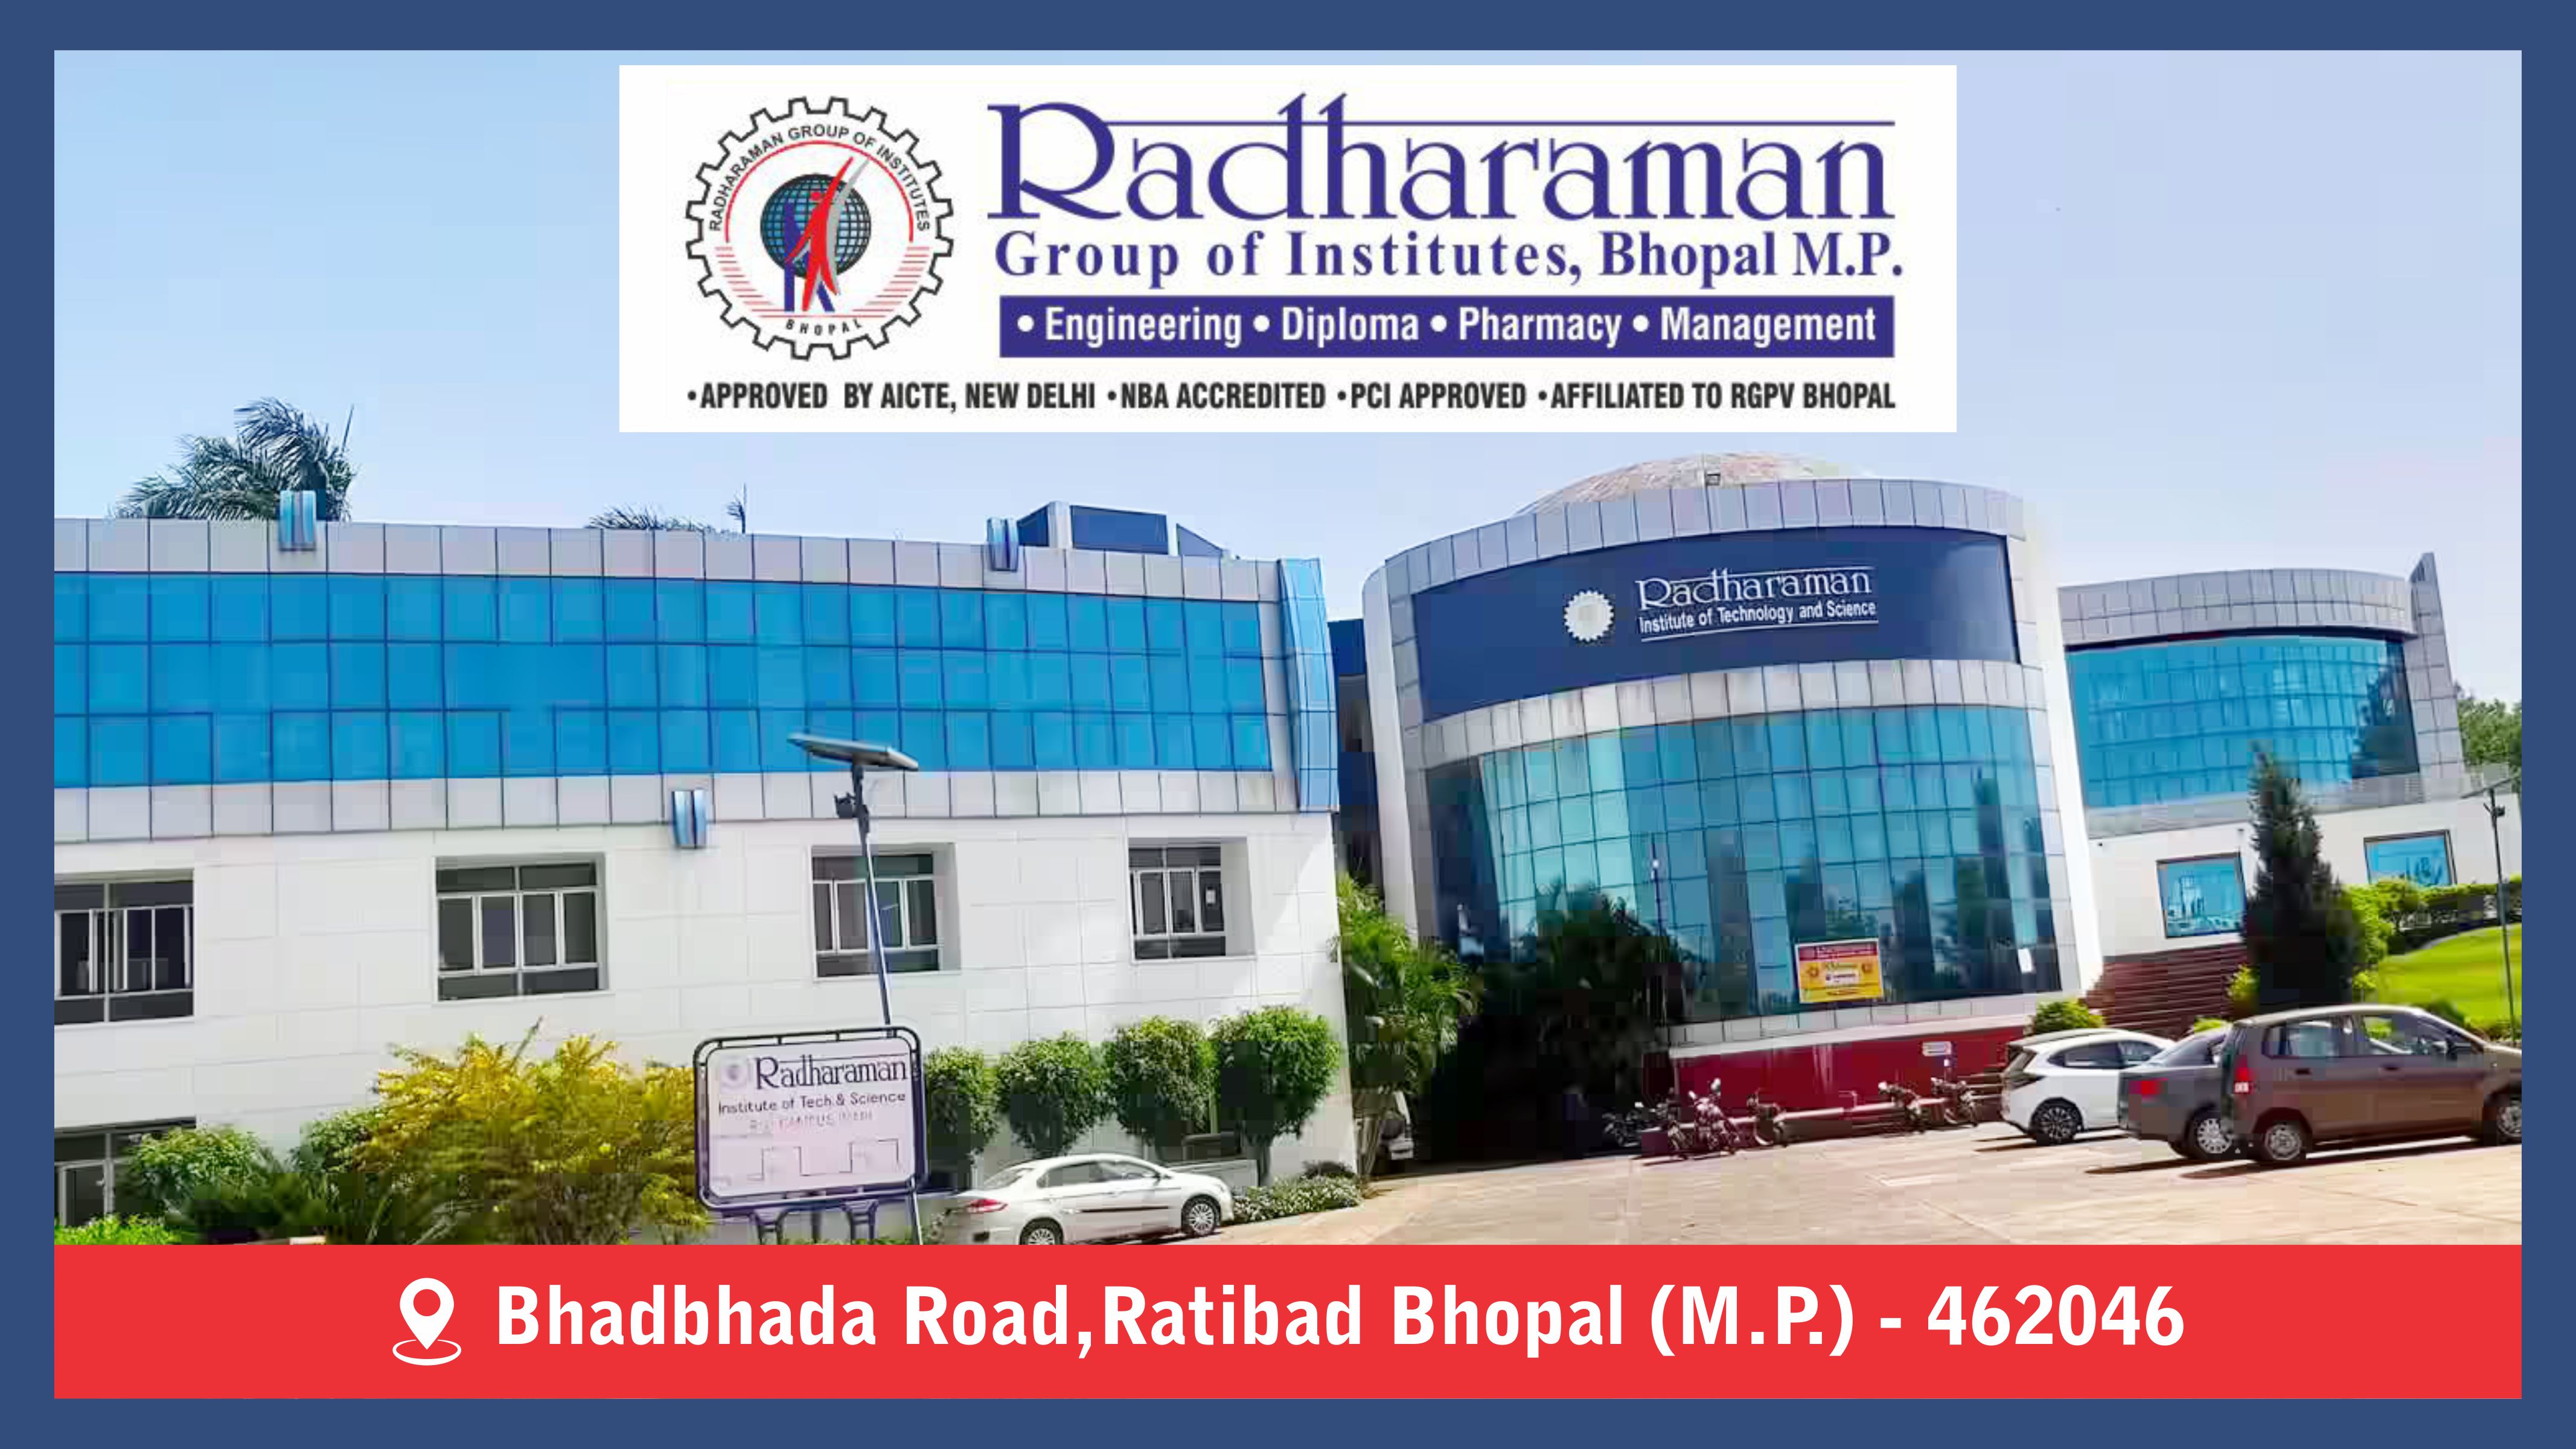 Out Side View of Radharaman Group of Institutes, Ratibad